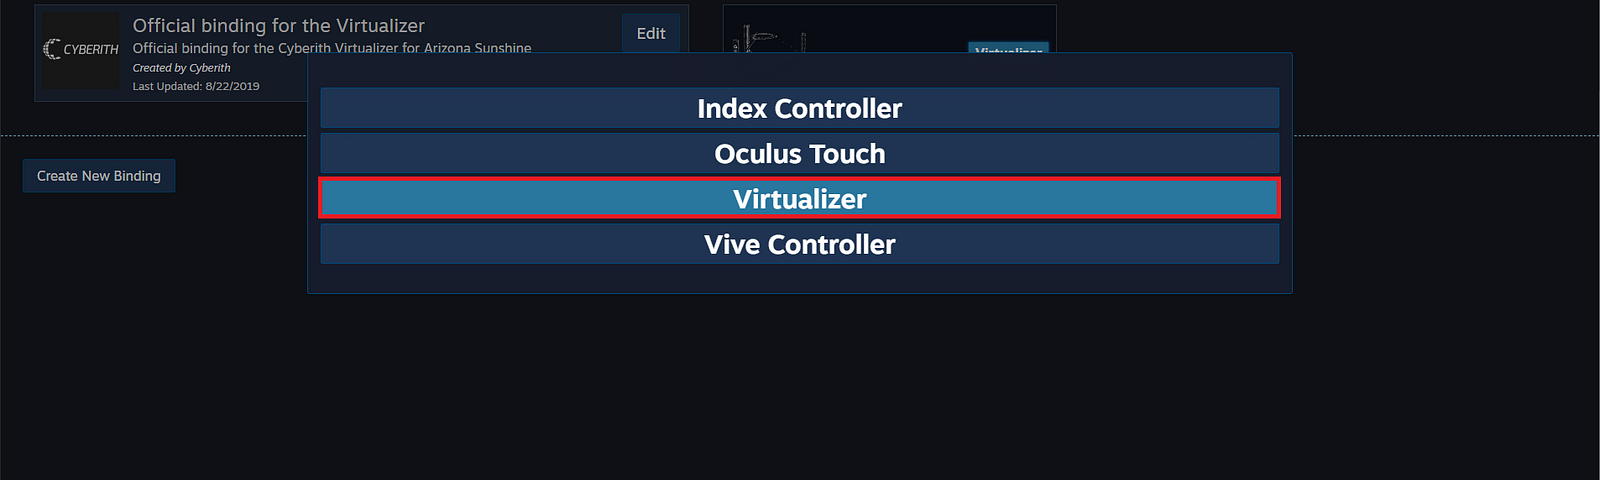 The Cyberith Virtualizer is shown as a controller in SteamVR in line with Index Controller, Oculus Touch and Vive Controller